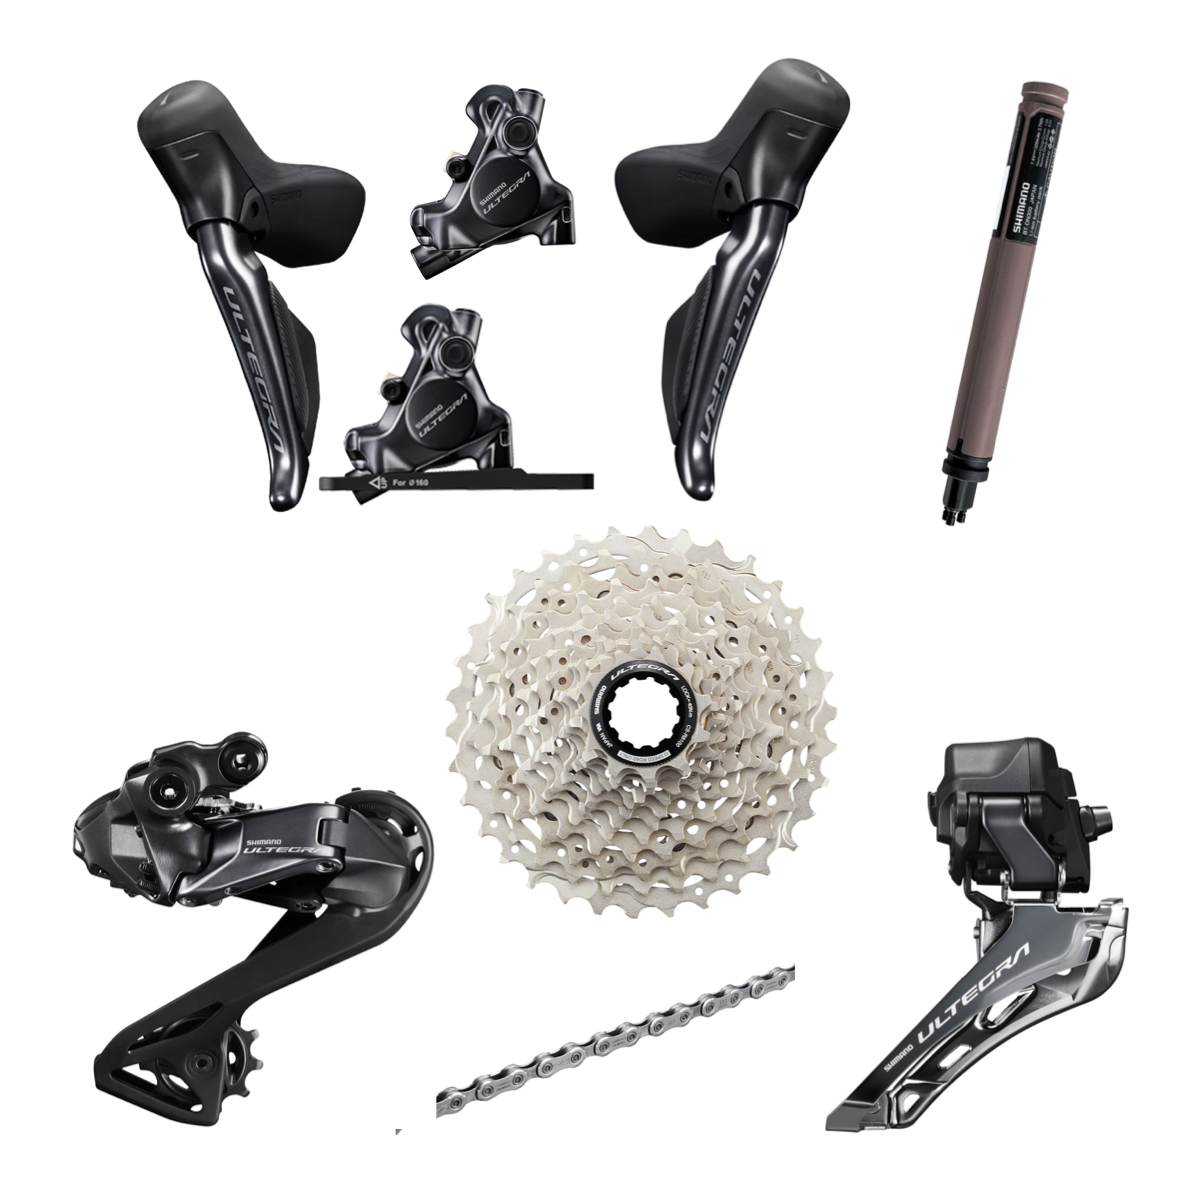 NEW Shimano Ultegra R8170 2x12-Speed Di2 Electronic Groupset